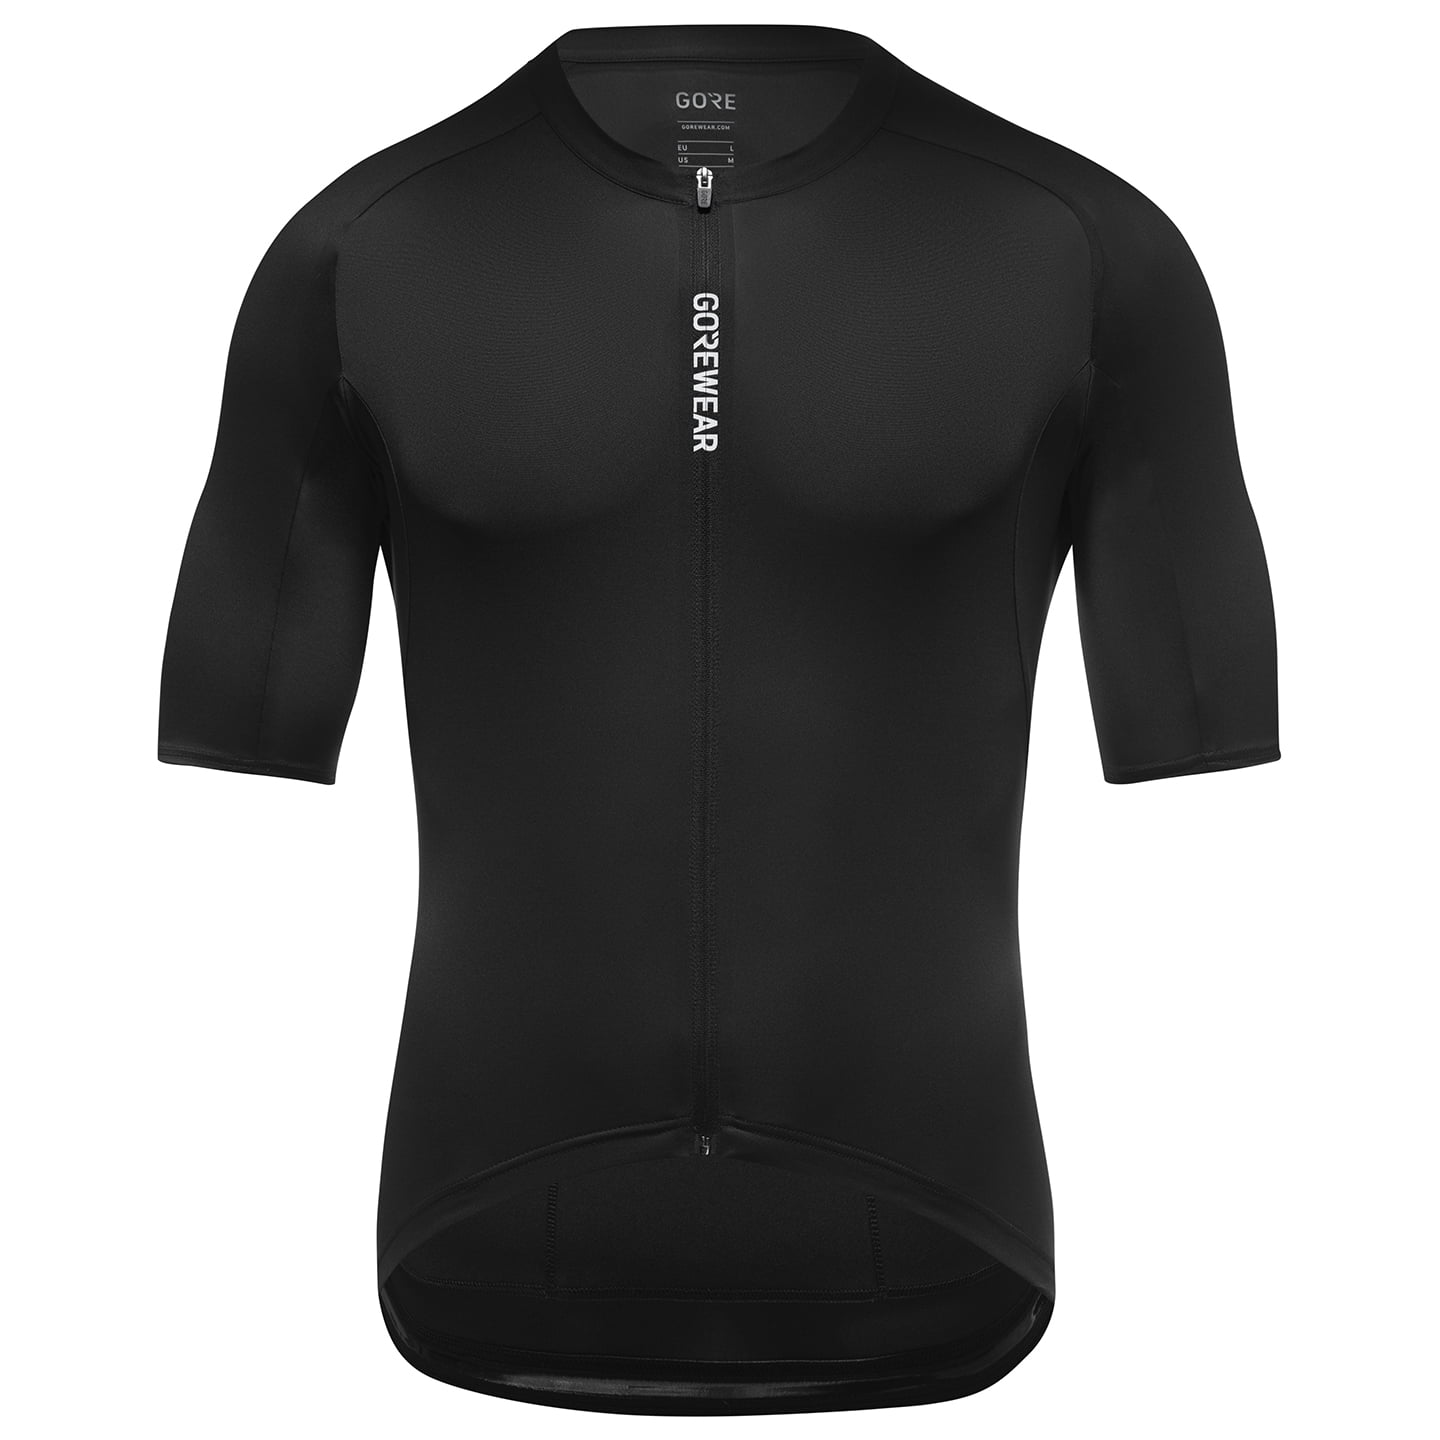 Spinshift Short Sleeve Jersey Short Sleeve Jersey, for men, size S, Cycling jersey, Cycling clothing